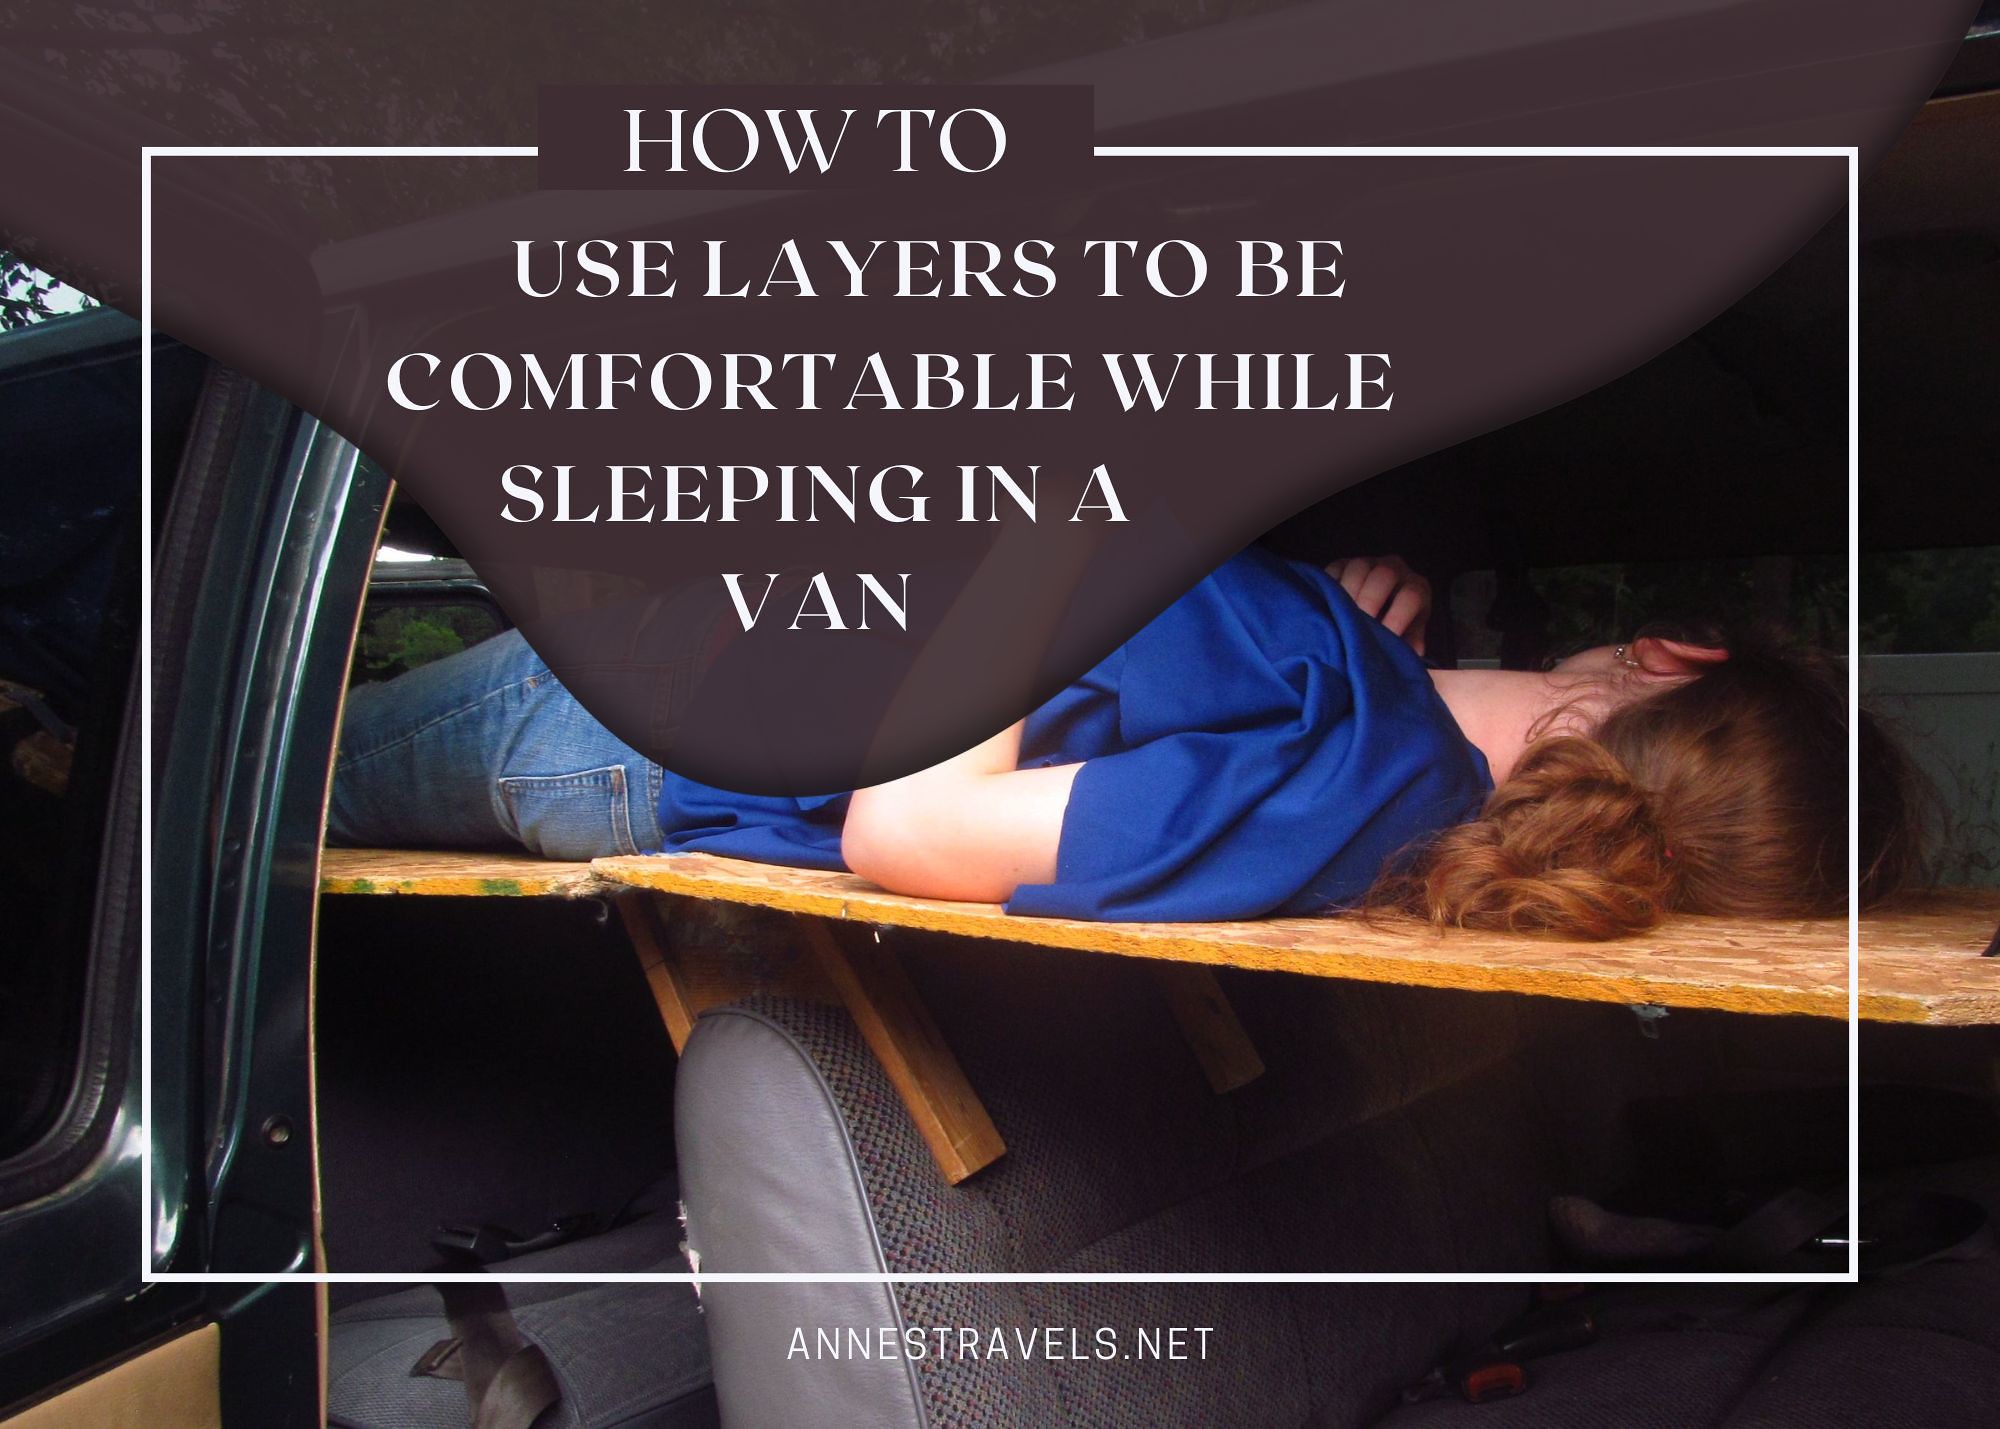 How to use layers to be comfortable while sleeping in a van (even on plywood!)